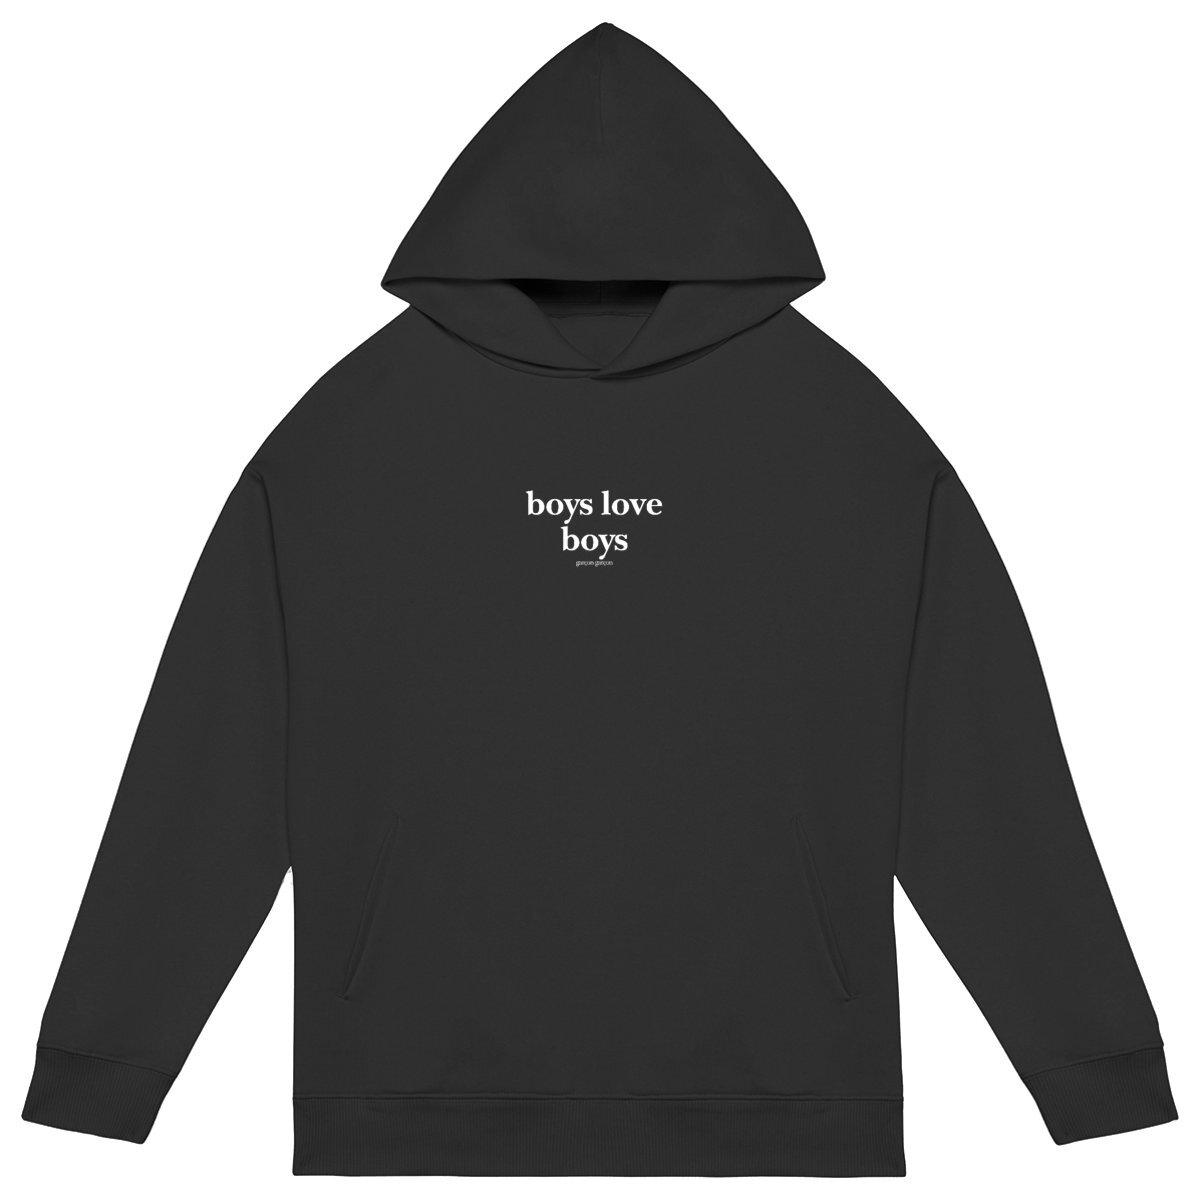 boys love boys hoodie over. garçon garçon essentiel oversized hoodie. Sleek in black and whispering Parisian chic, this hoodie is the sartorial whisper of 'garçon garçon' — a statement of understated elegance. Perfect for those who carry a piece of Paris in their hearts and a touch of audacity on their sleeves.